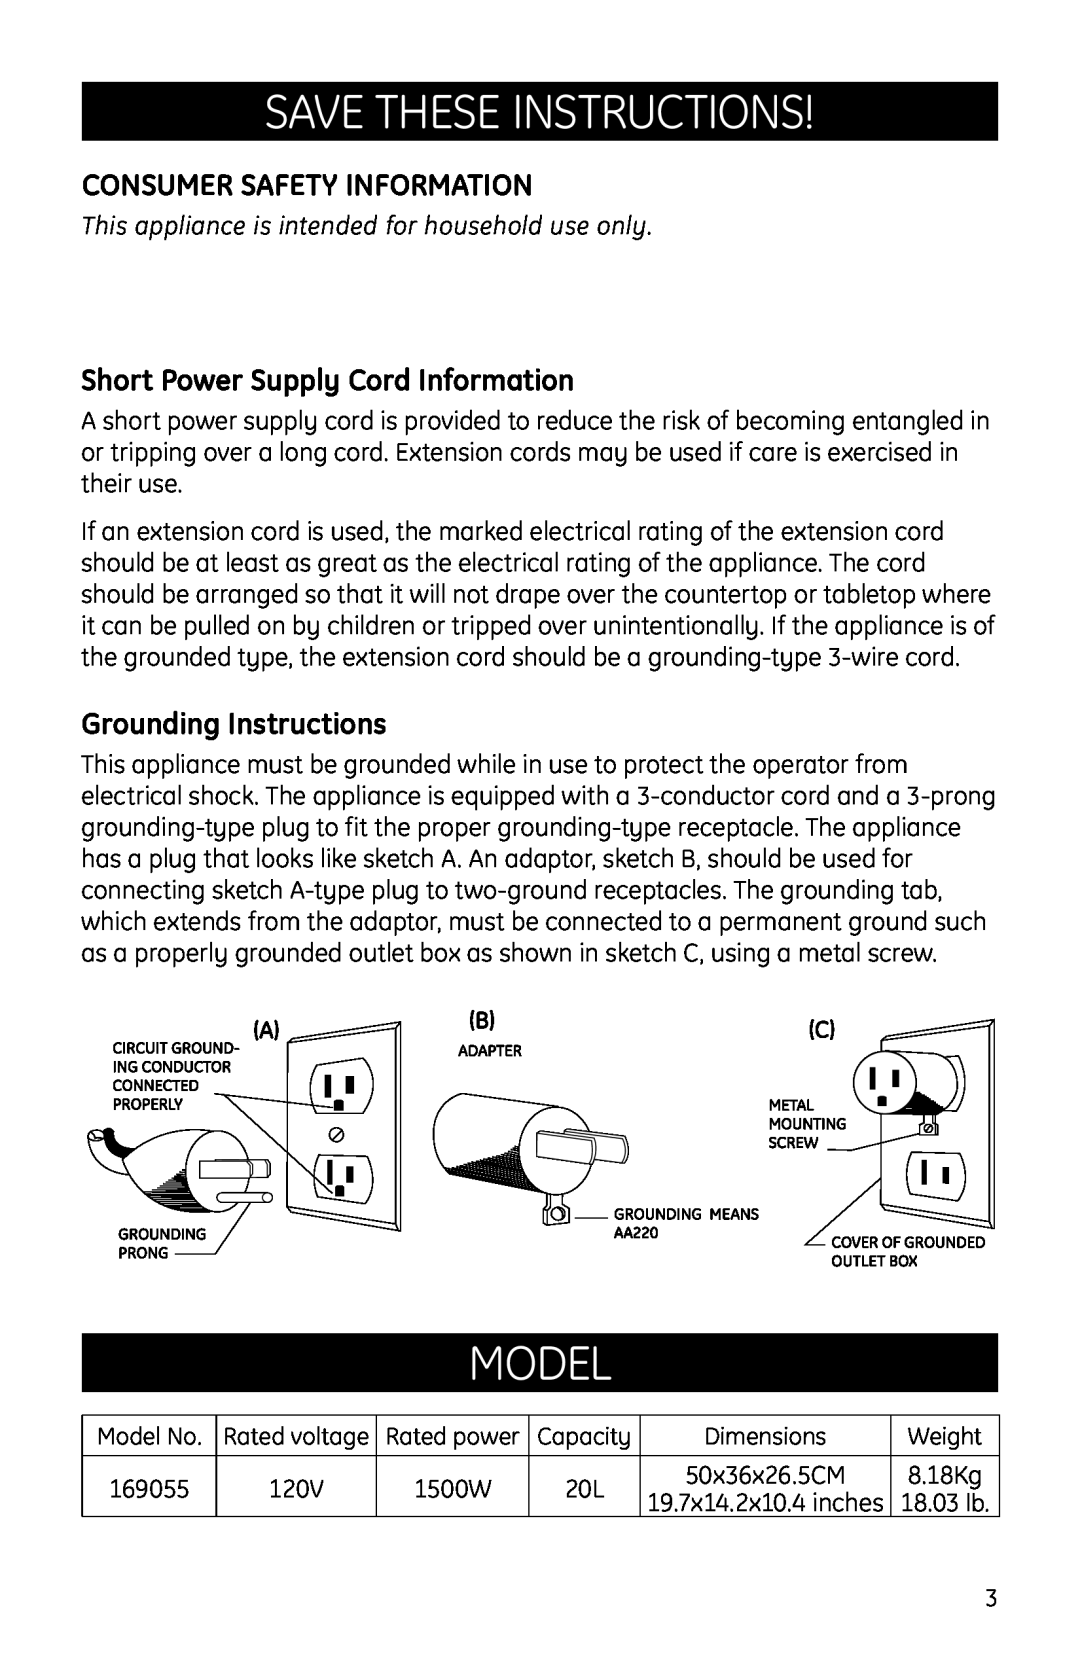 GE Countertop Oven manual Save These Instructions, Model, Consumer Safety Information, Short Power Supply Cord Information 